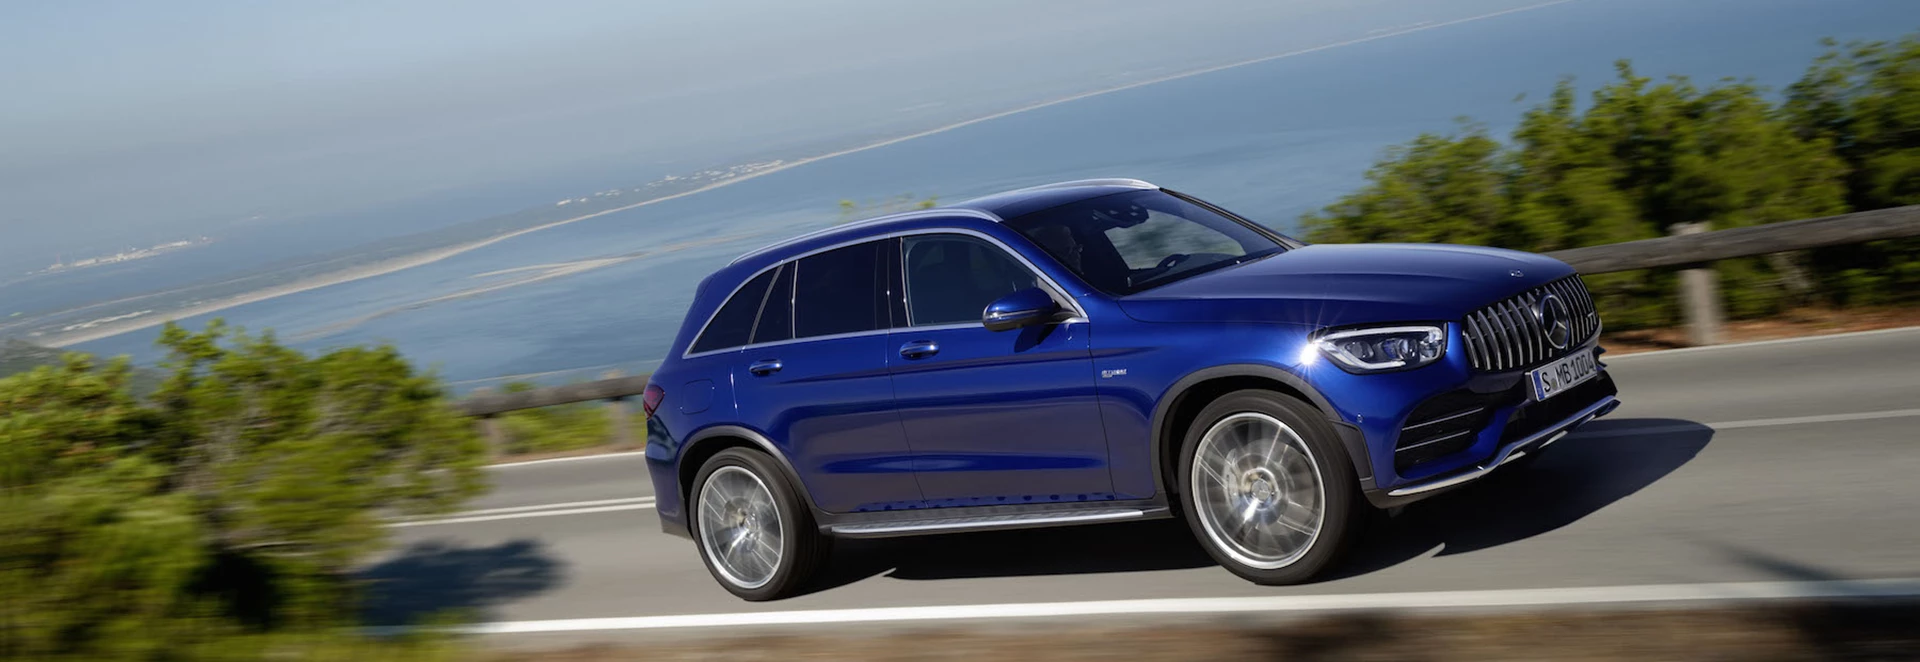 Mercedes-Benz unveils hot facelifted GLC 43 SUV variants